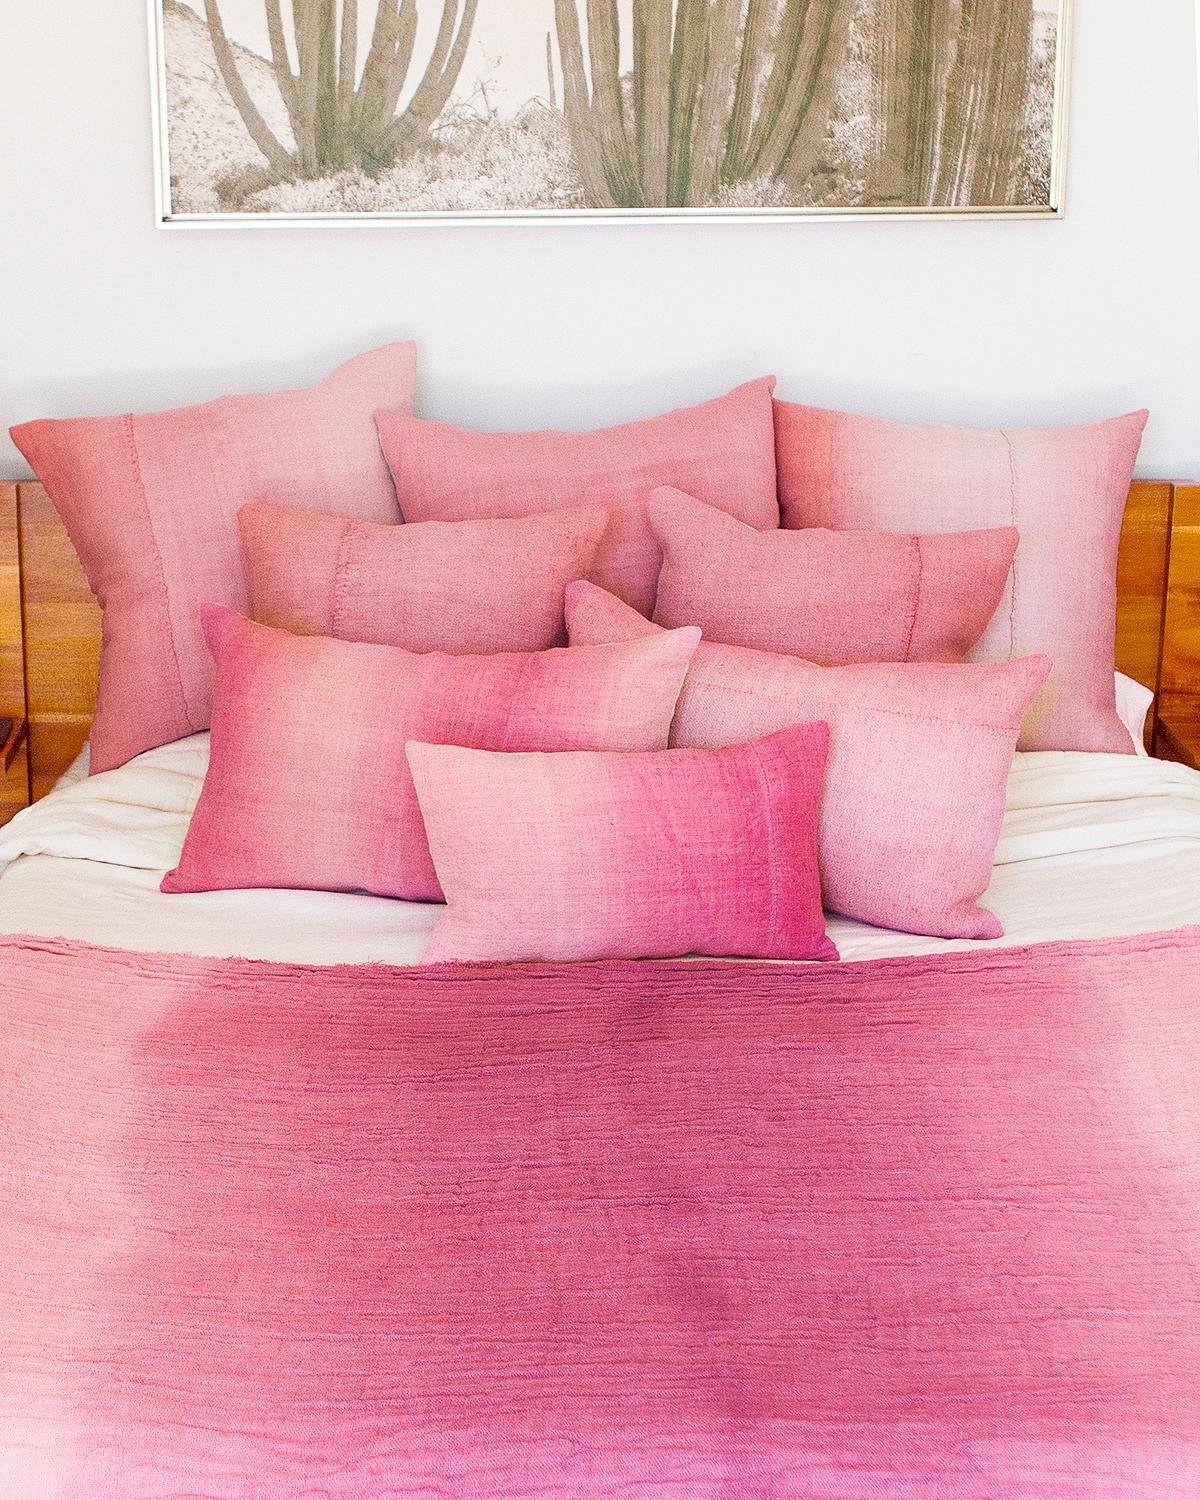 Organic Modern Espanyolet Pink Ombre Hand-Painted Vintage Linen Pillow 20